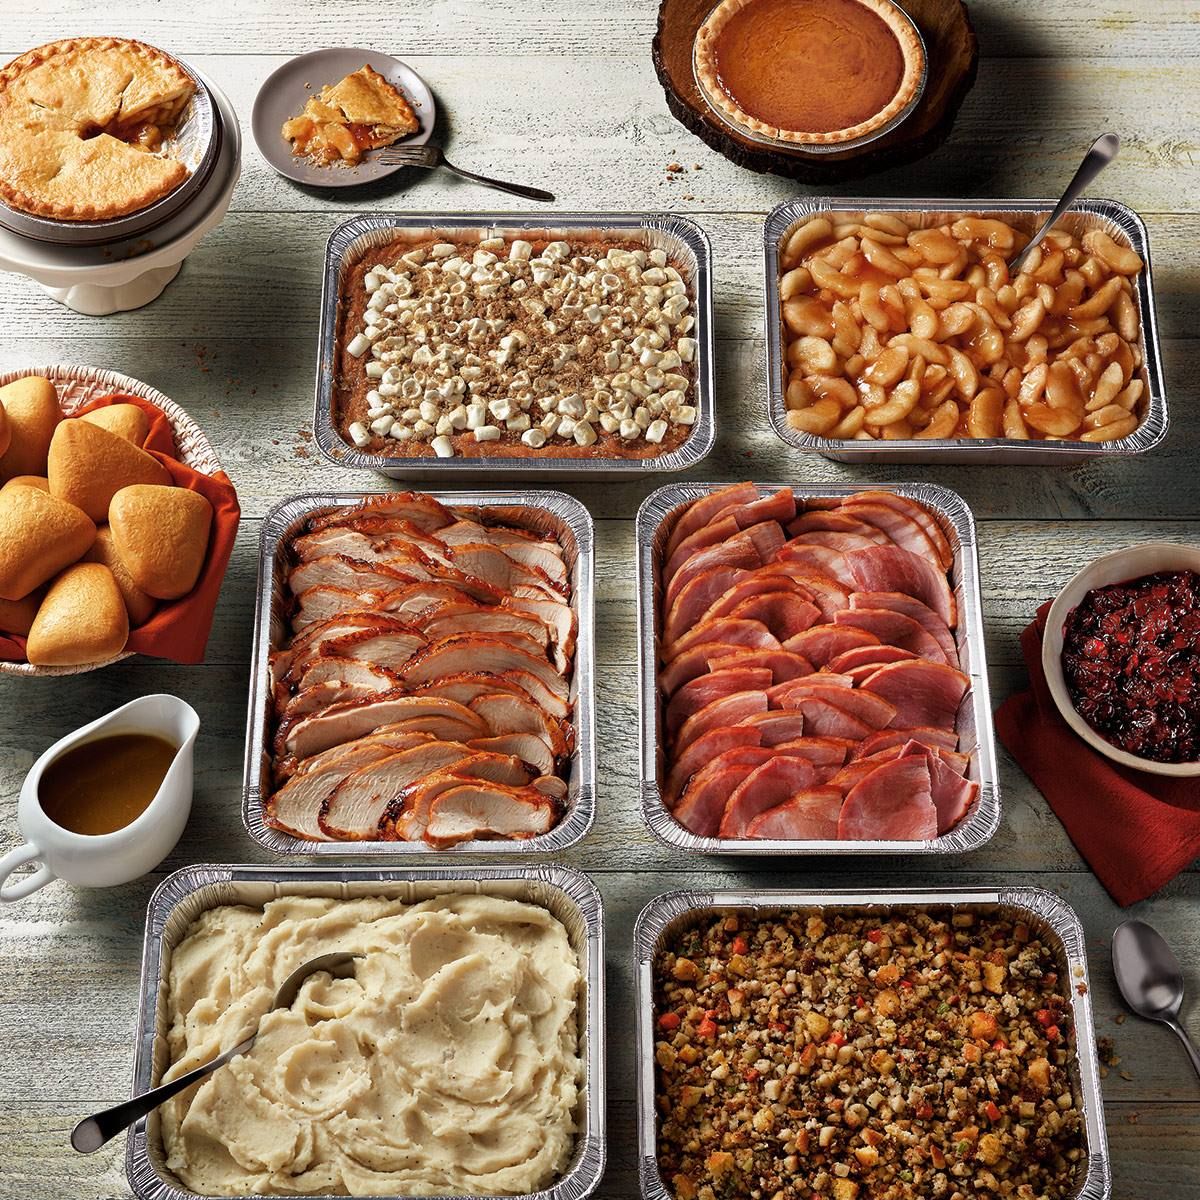 What Boston Market Is Like On Thanksgiving According To A Former Server